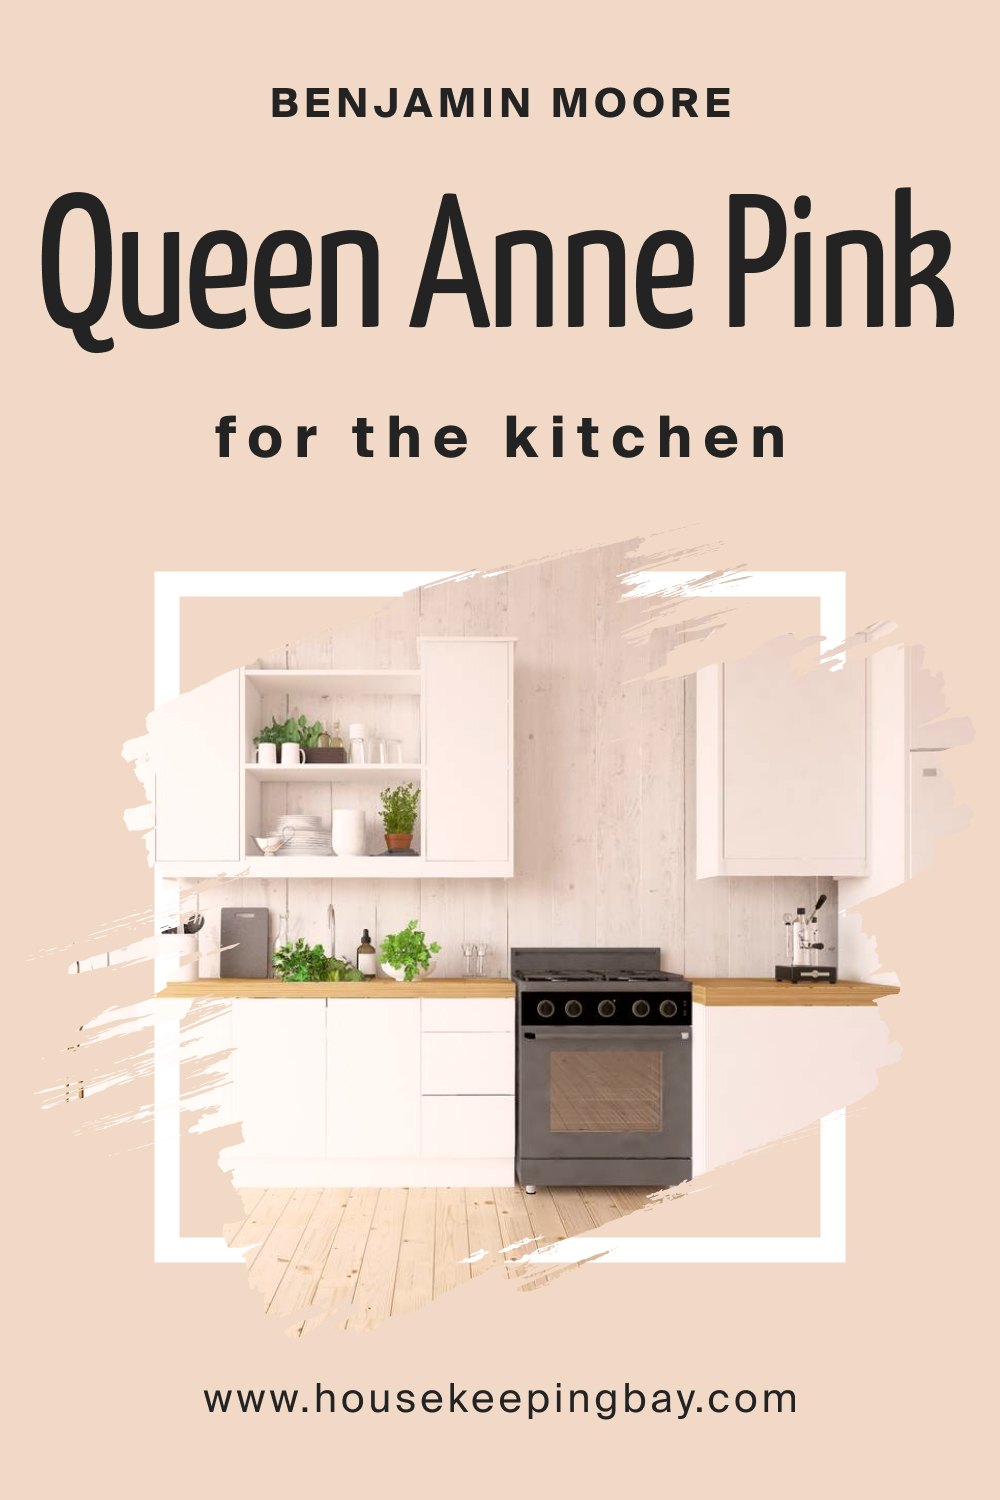 How to Use Queen Anne Pink HC-60 in the Kitchen?